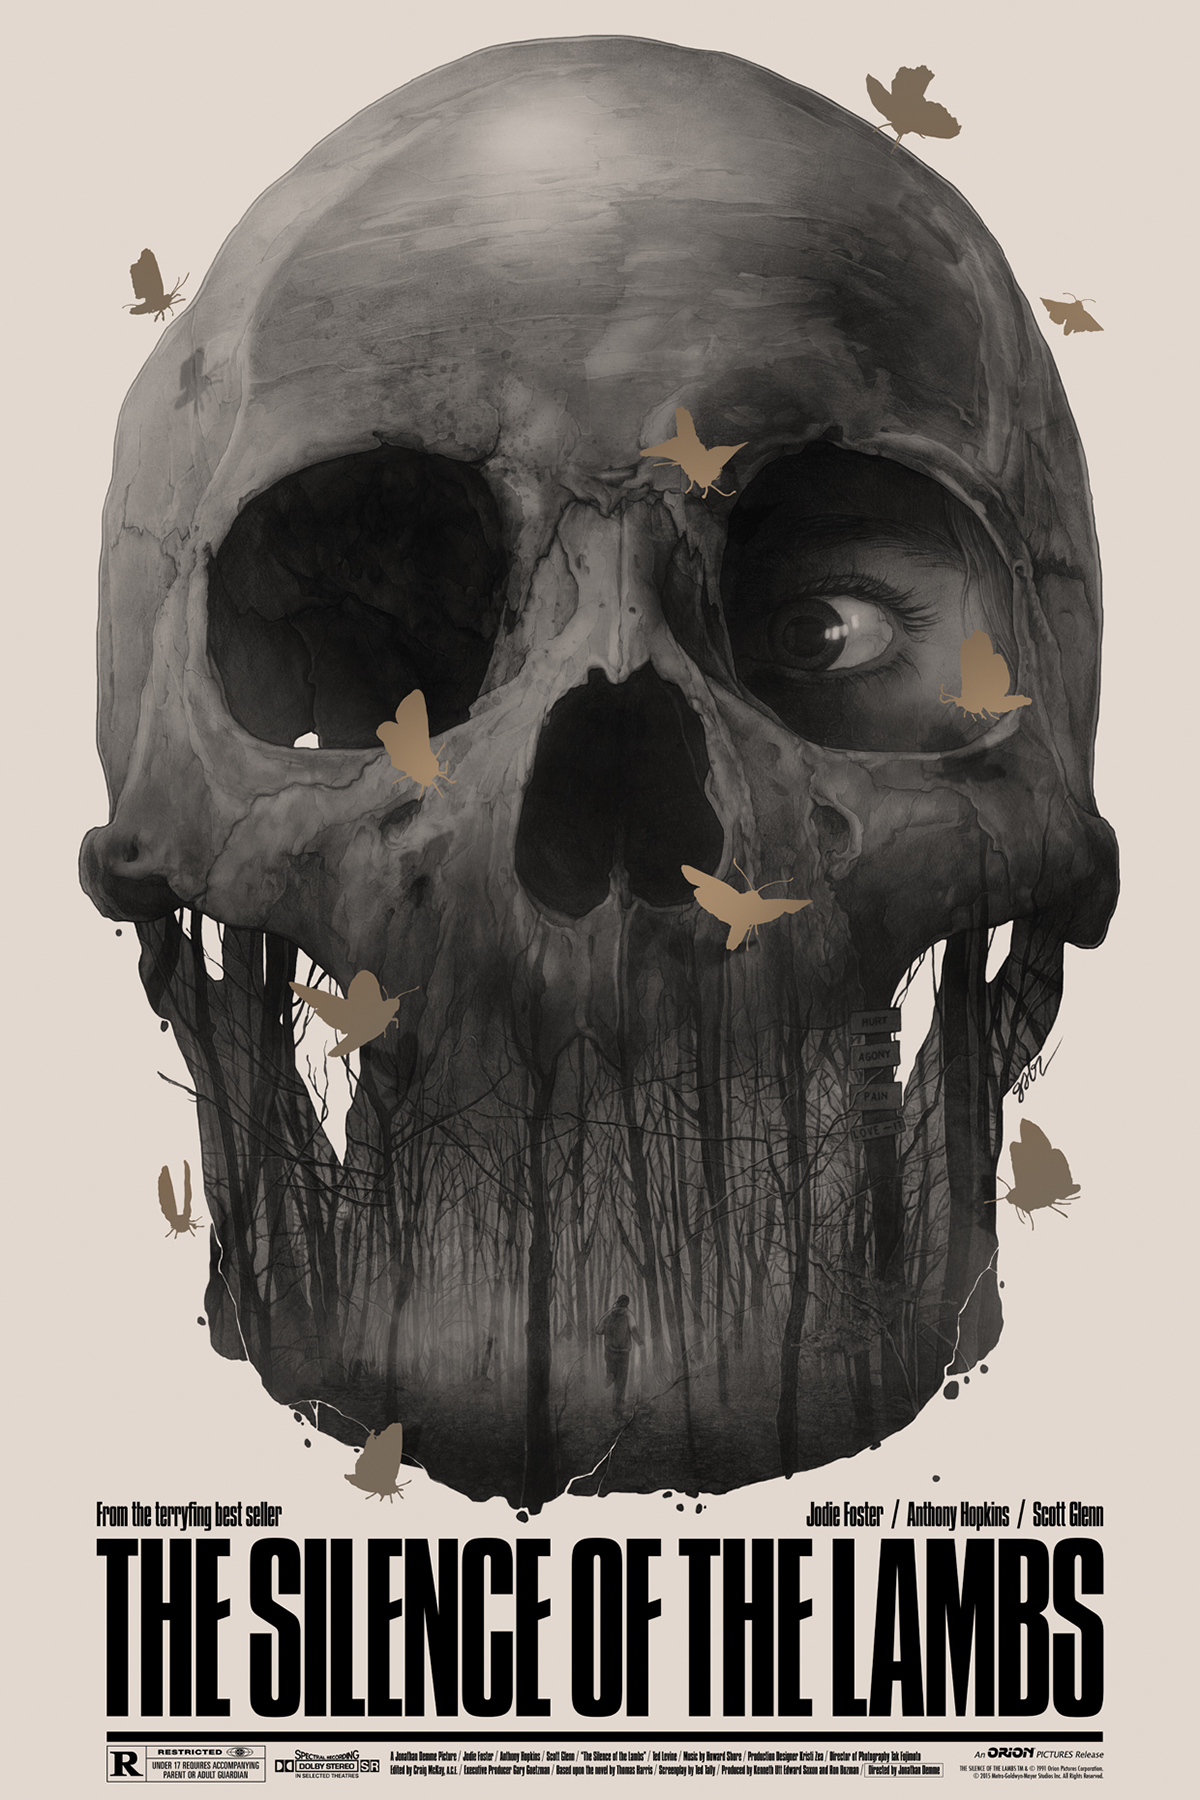 eyes, Creepy, Skull, Digital art, Portrait display, Movies, Film posters, White background, Trees, Butterfly, The Silence of the Lambs Wallpaper